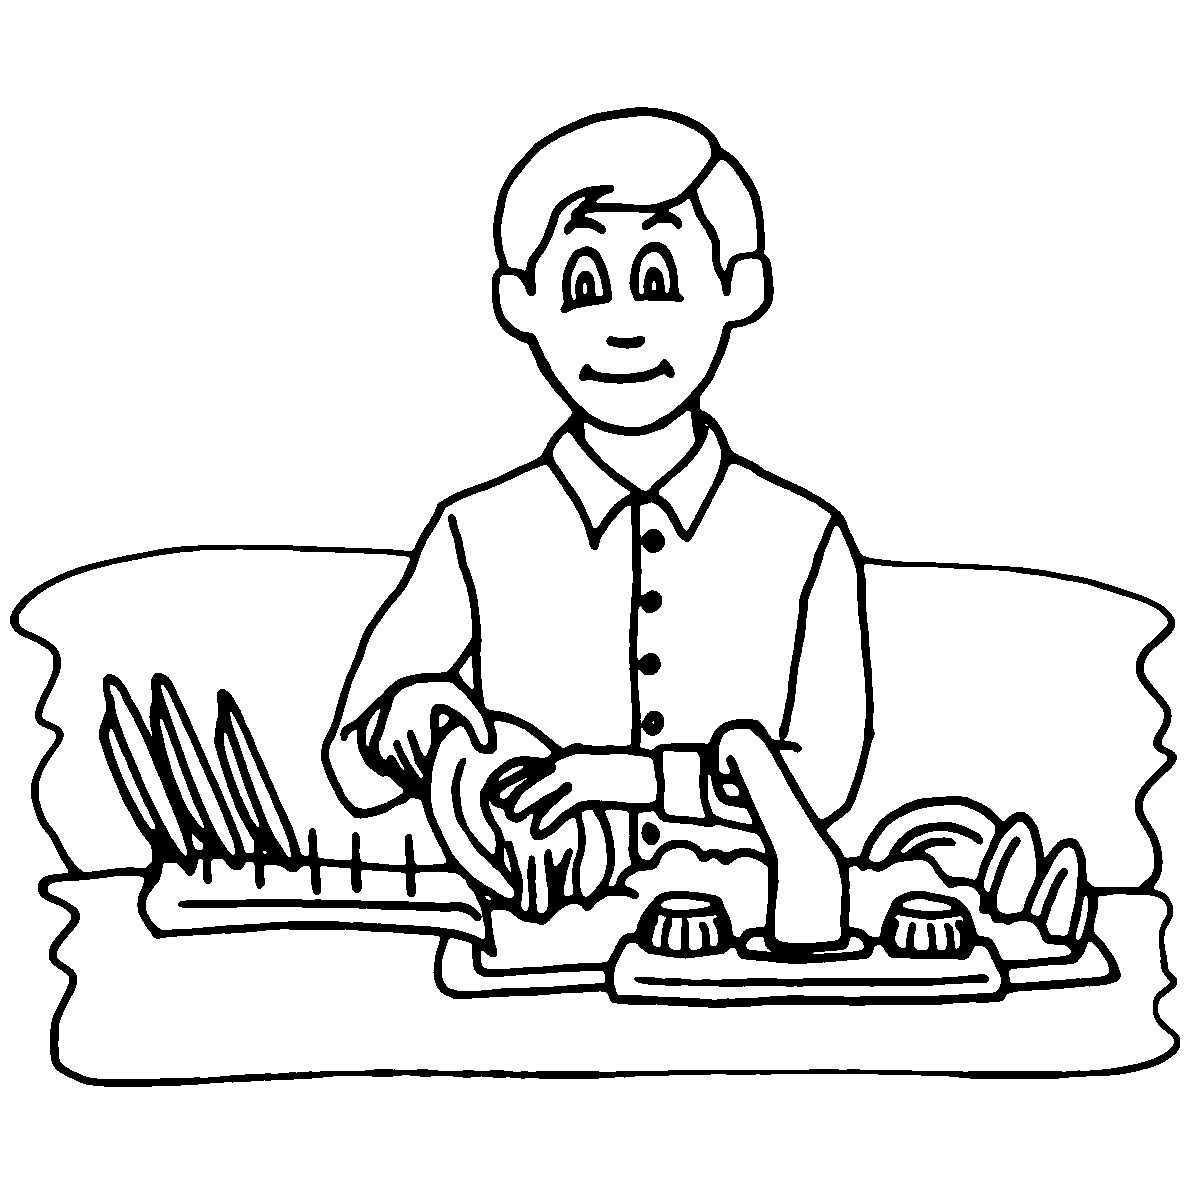 Kids clipart black and white chores